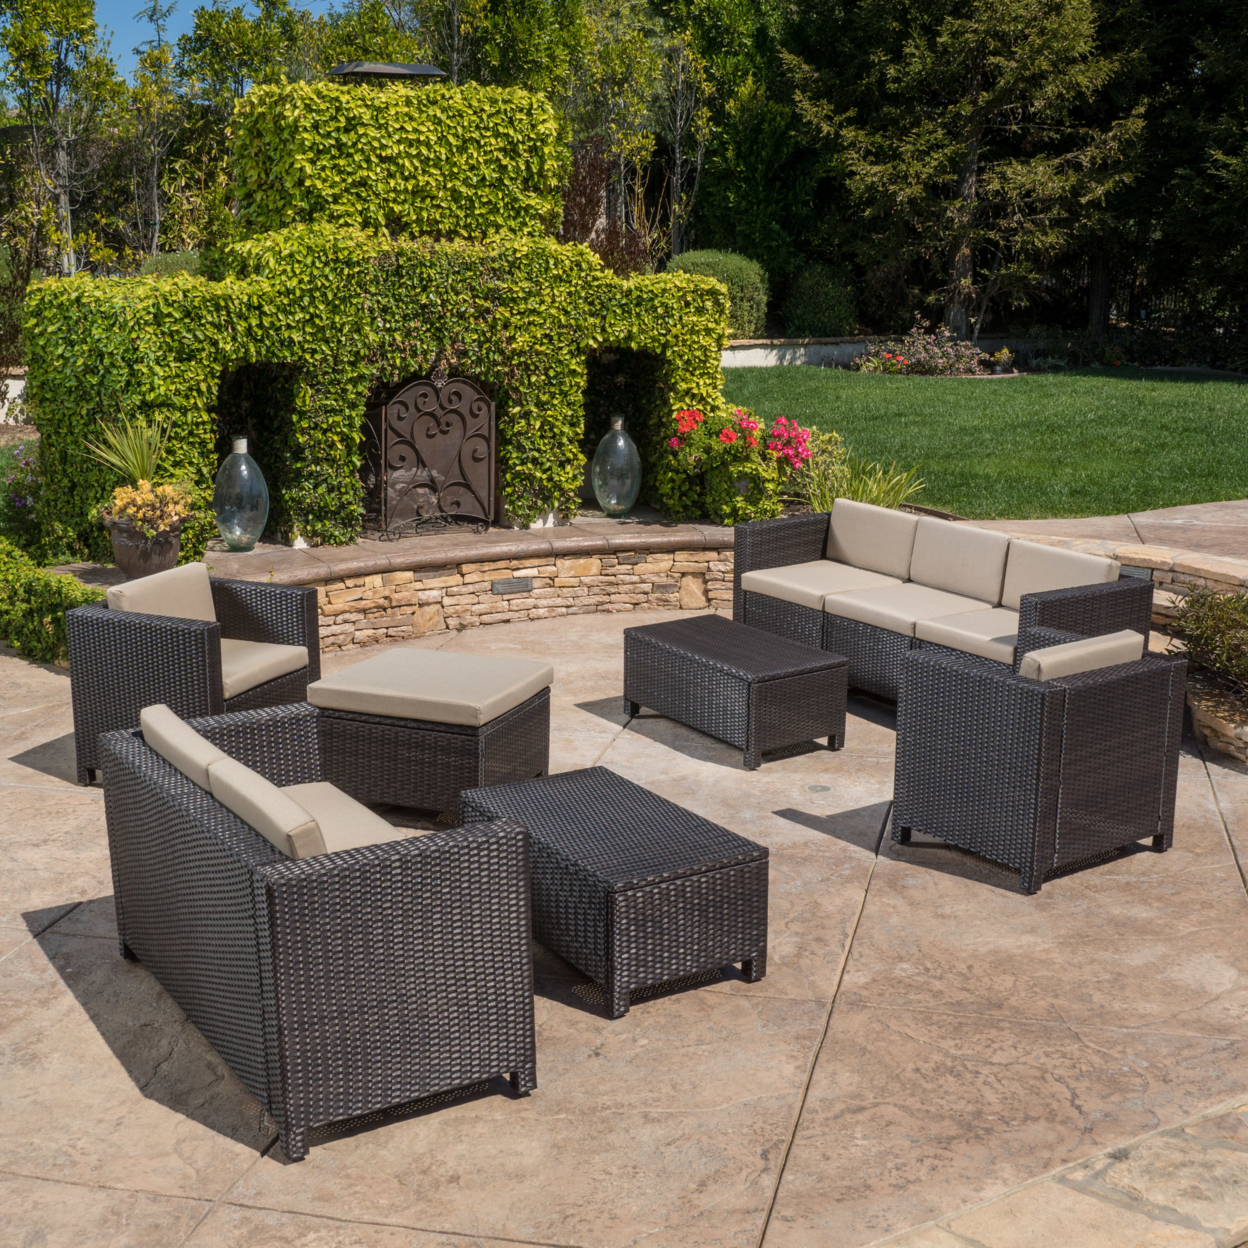 Budva 9pc Outdoor Wicker Sectional Sofa Set With Cushions - Light Brown Wicker